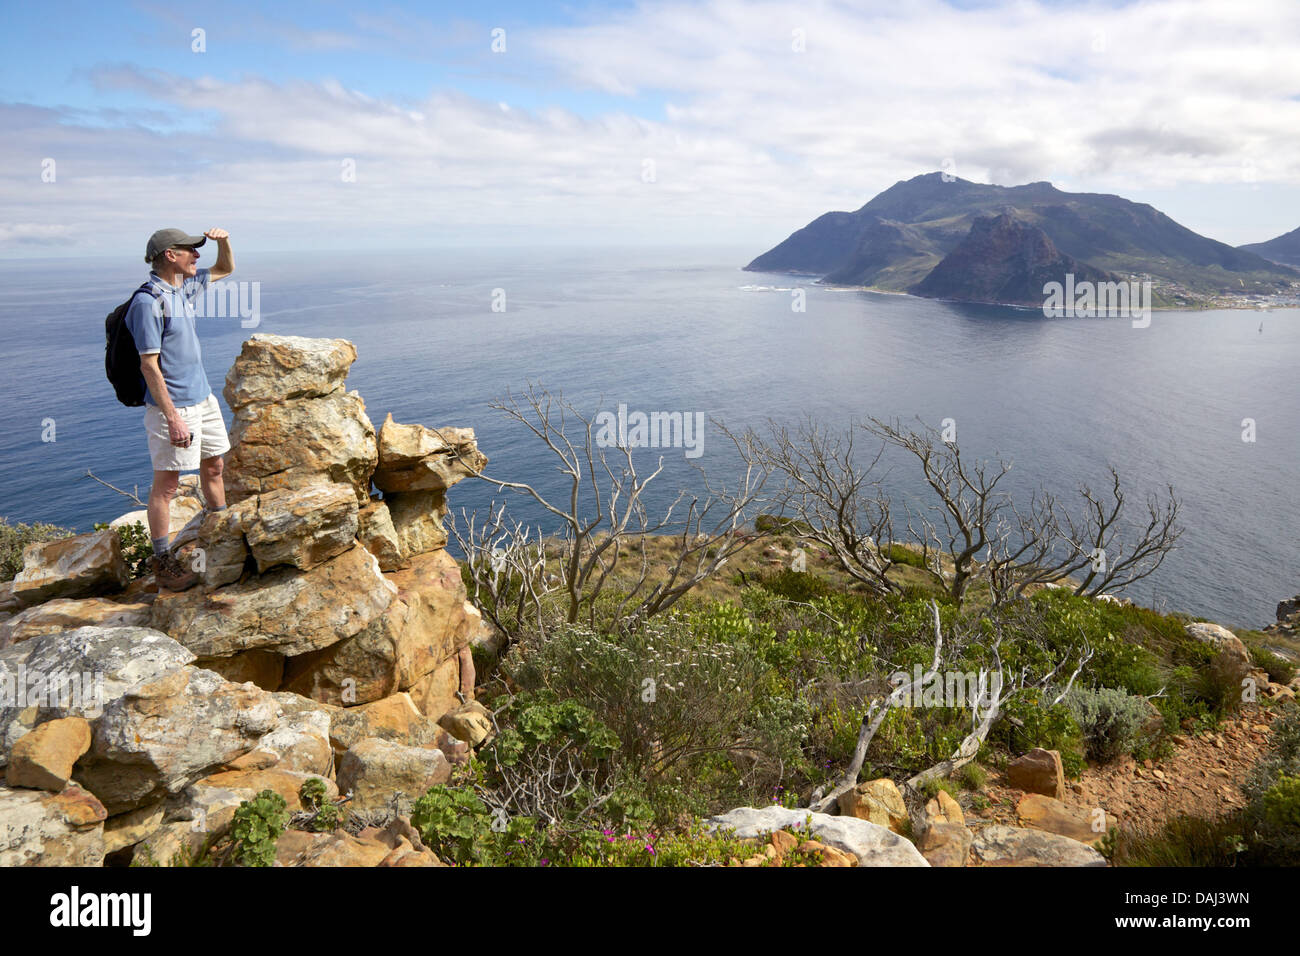 A hiker pauses along the Chapman's Peak section of the Hoerikwaggo Trail, in Table Mountain National Park, South Africa. Stock Photo